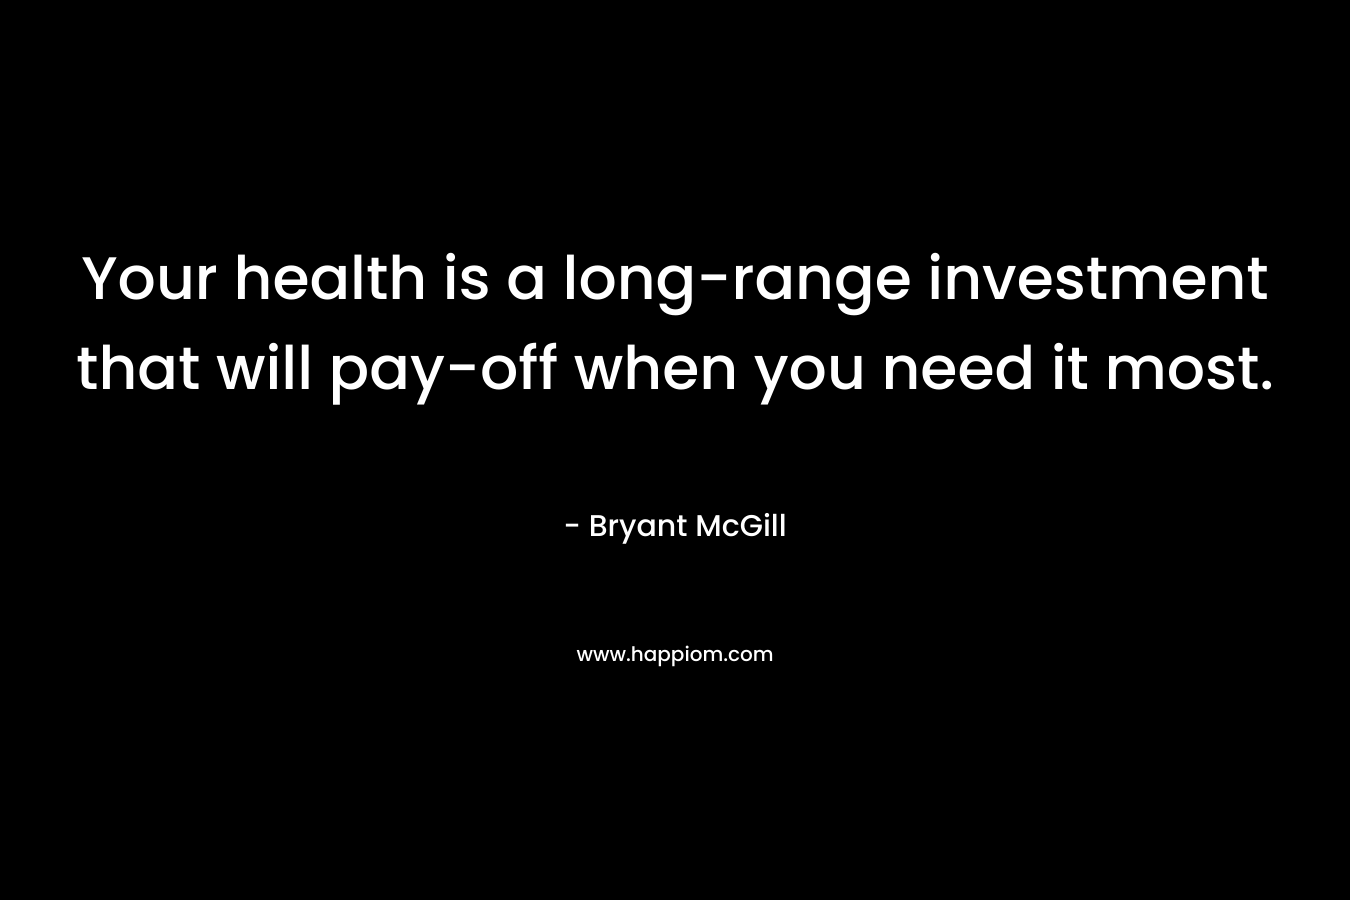 Your health is a long-range investment that will pay-off when you need it most. – Bryant McGill